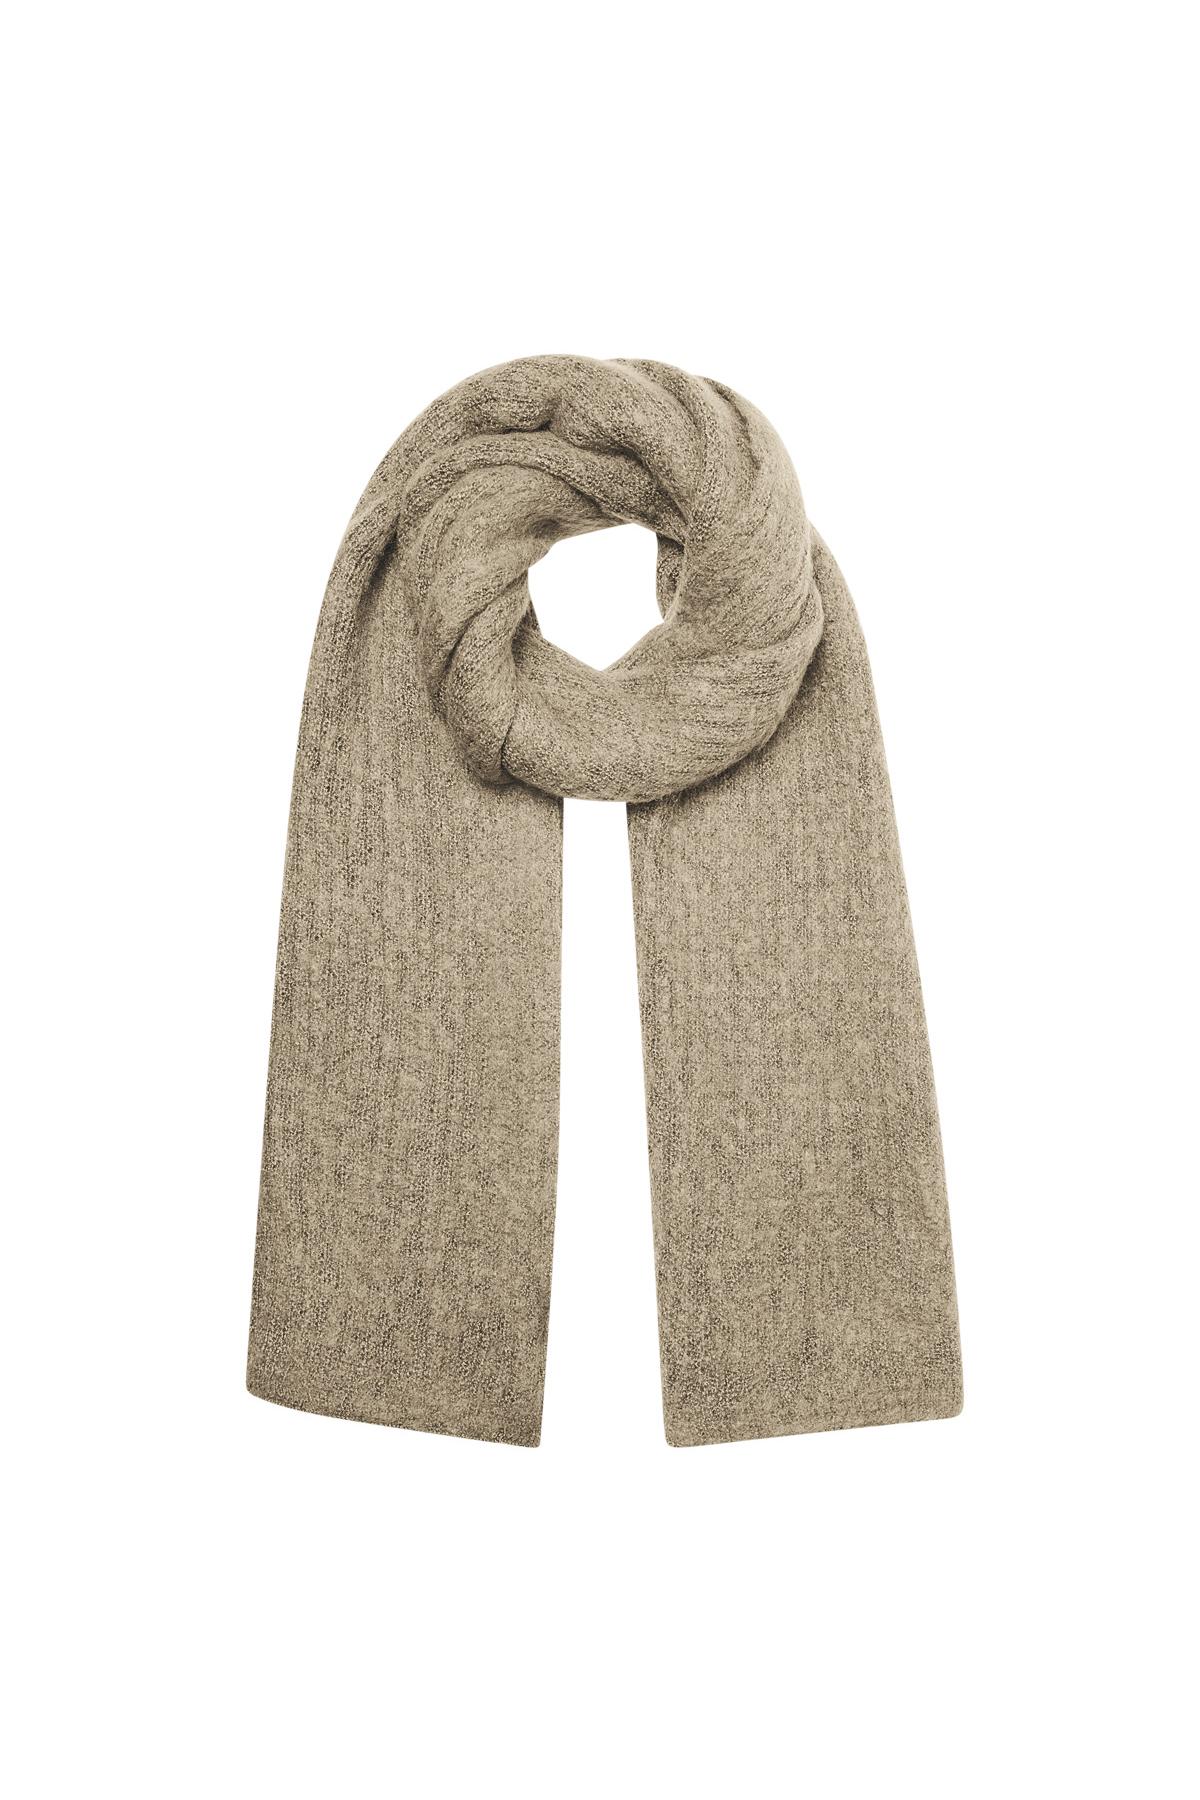 Scarf knitted plain - beige h5 